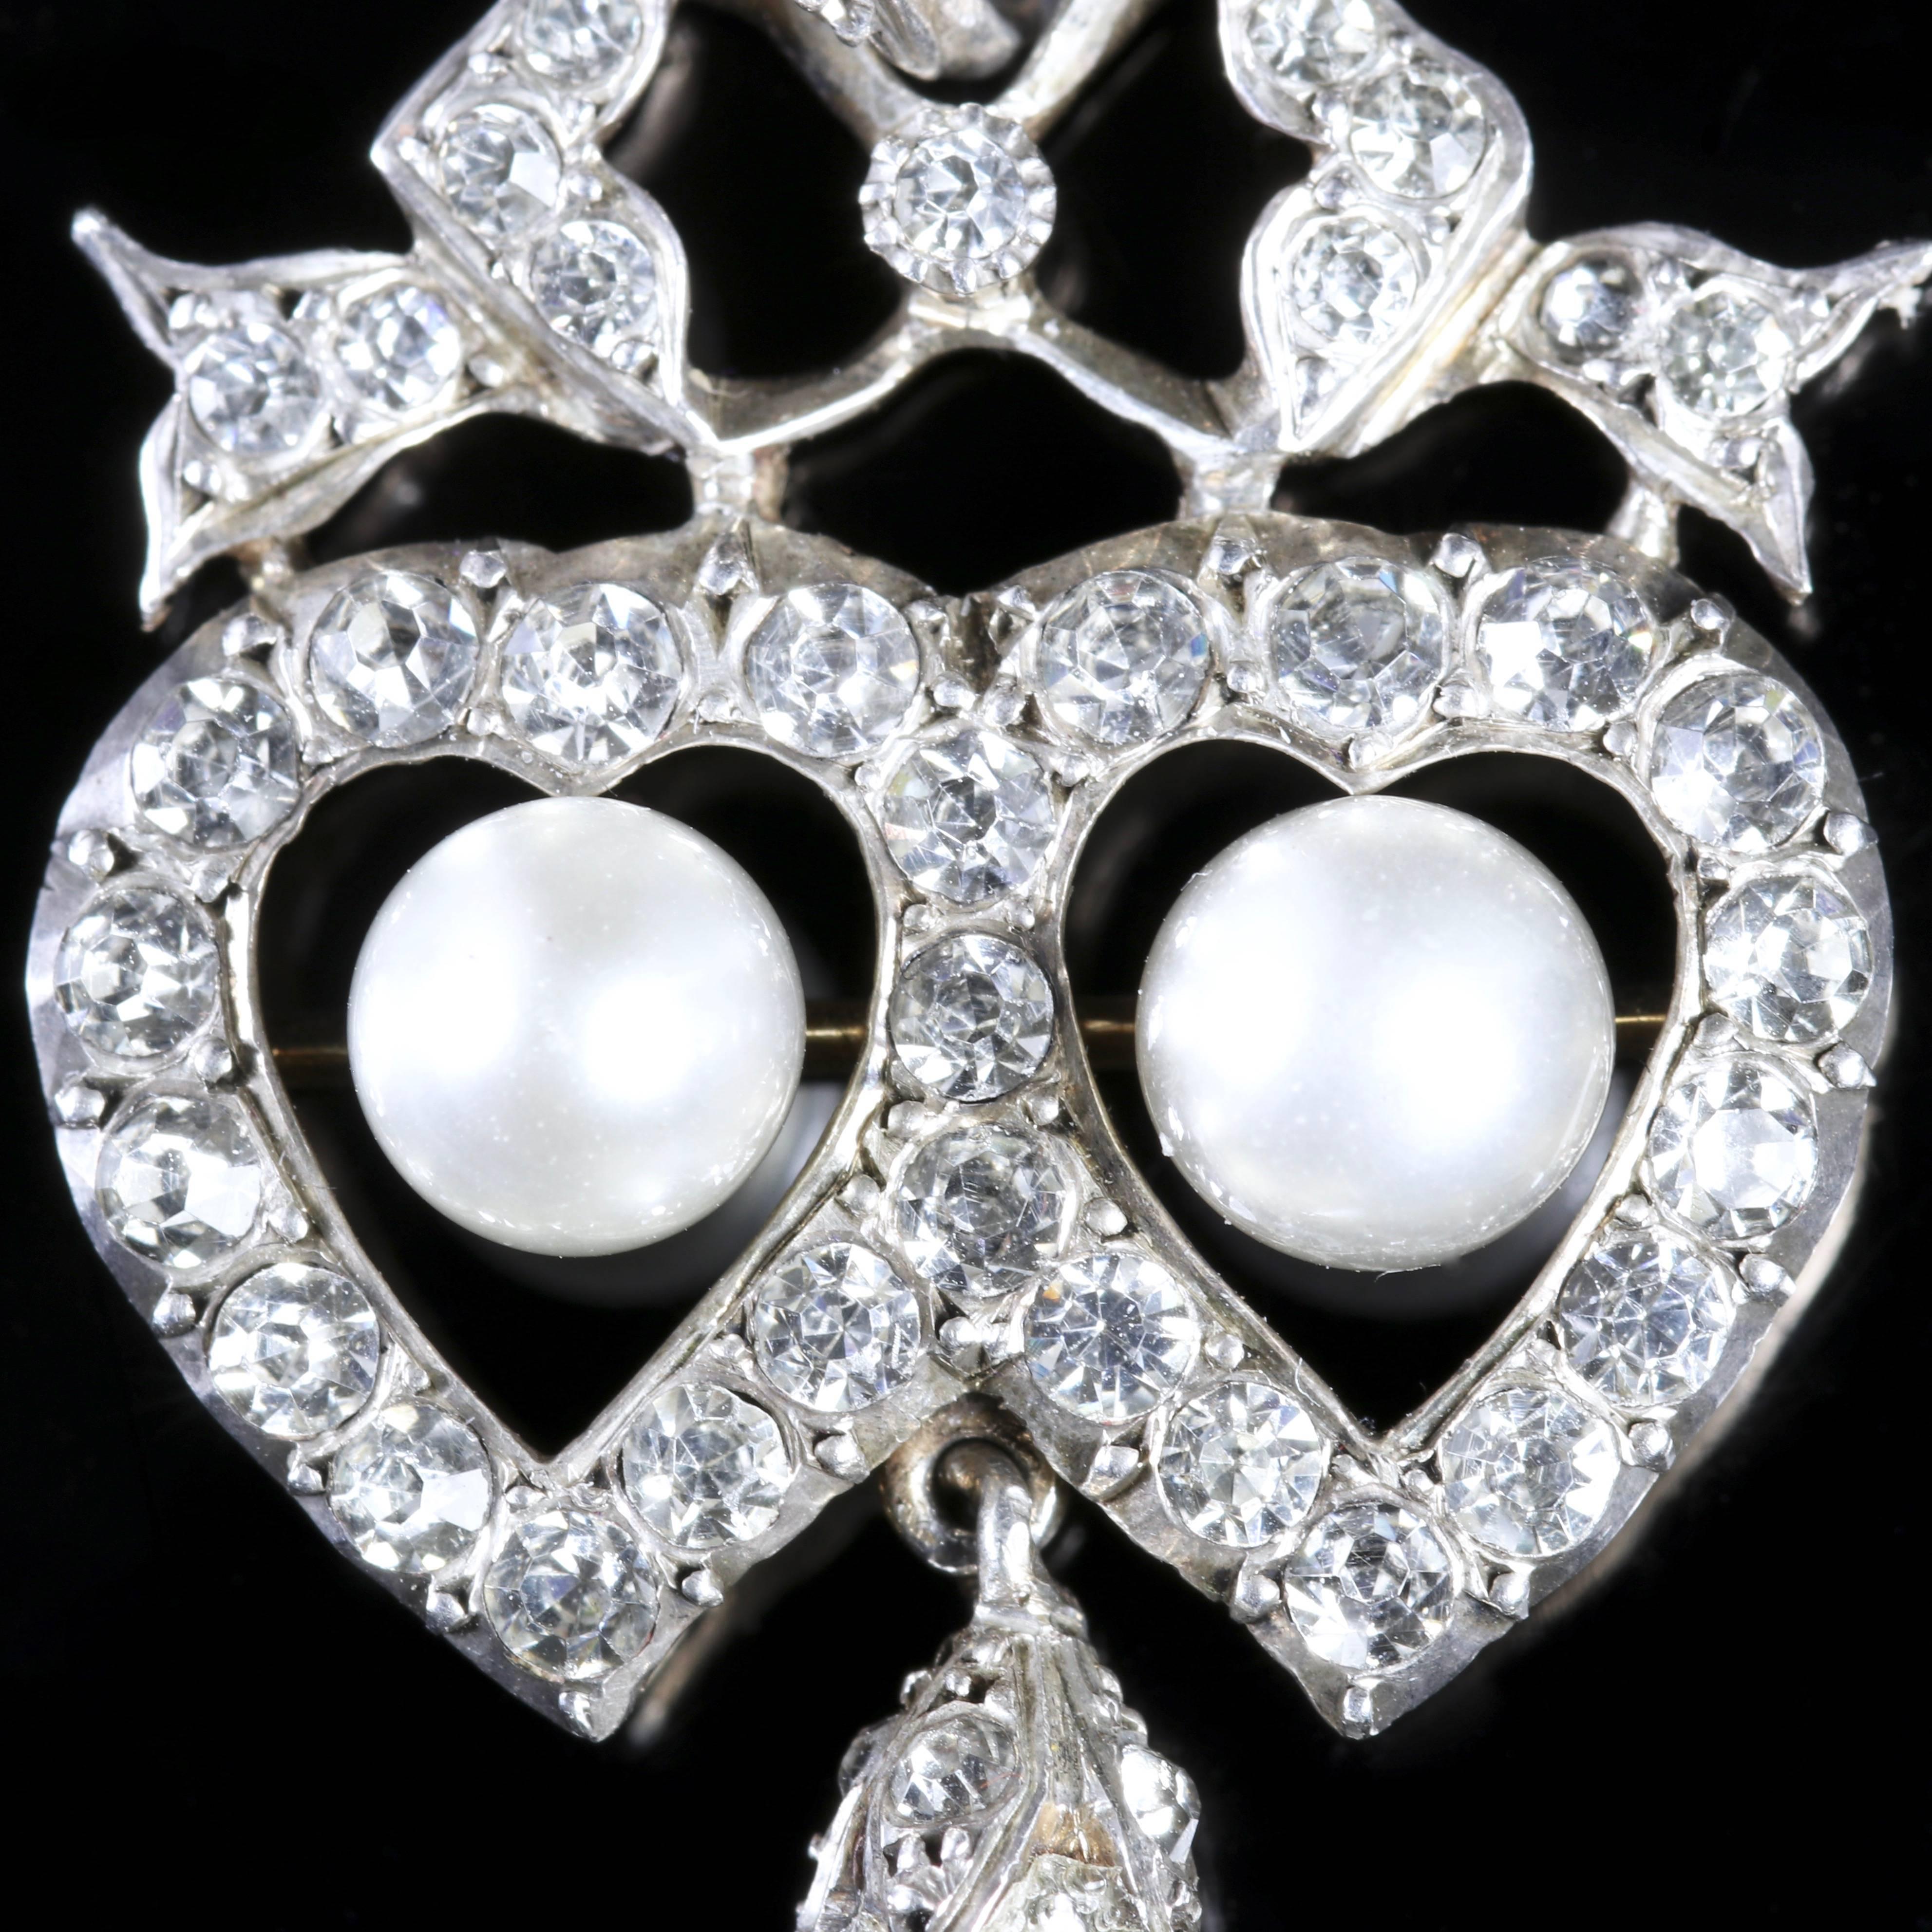 This fabulous Sterling Silver Edwardian pendant is set with Pearls in two intertwined hearts.

The intertwined hearts are a sign of love and devotion.

The pendant is decorated with beautiful white Paste Stones with two central Pearls and an elegant